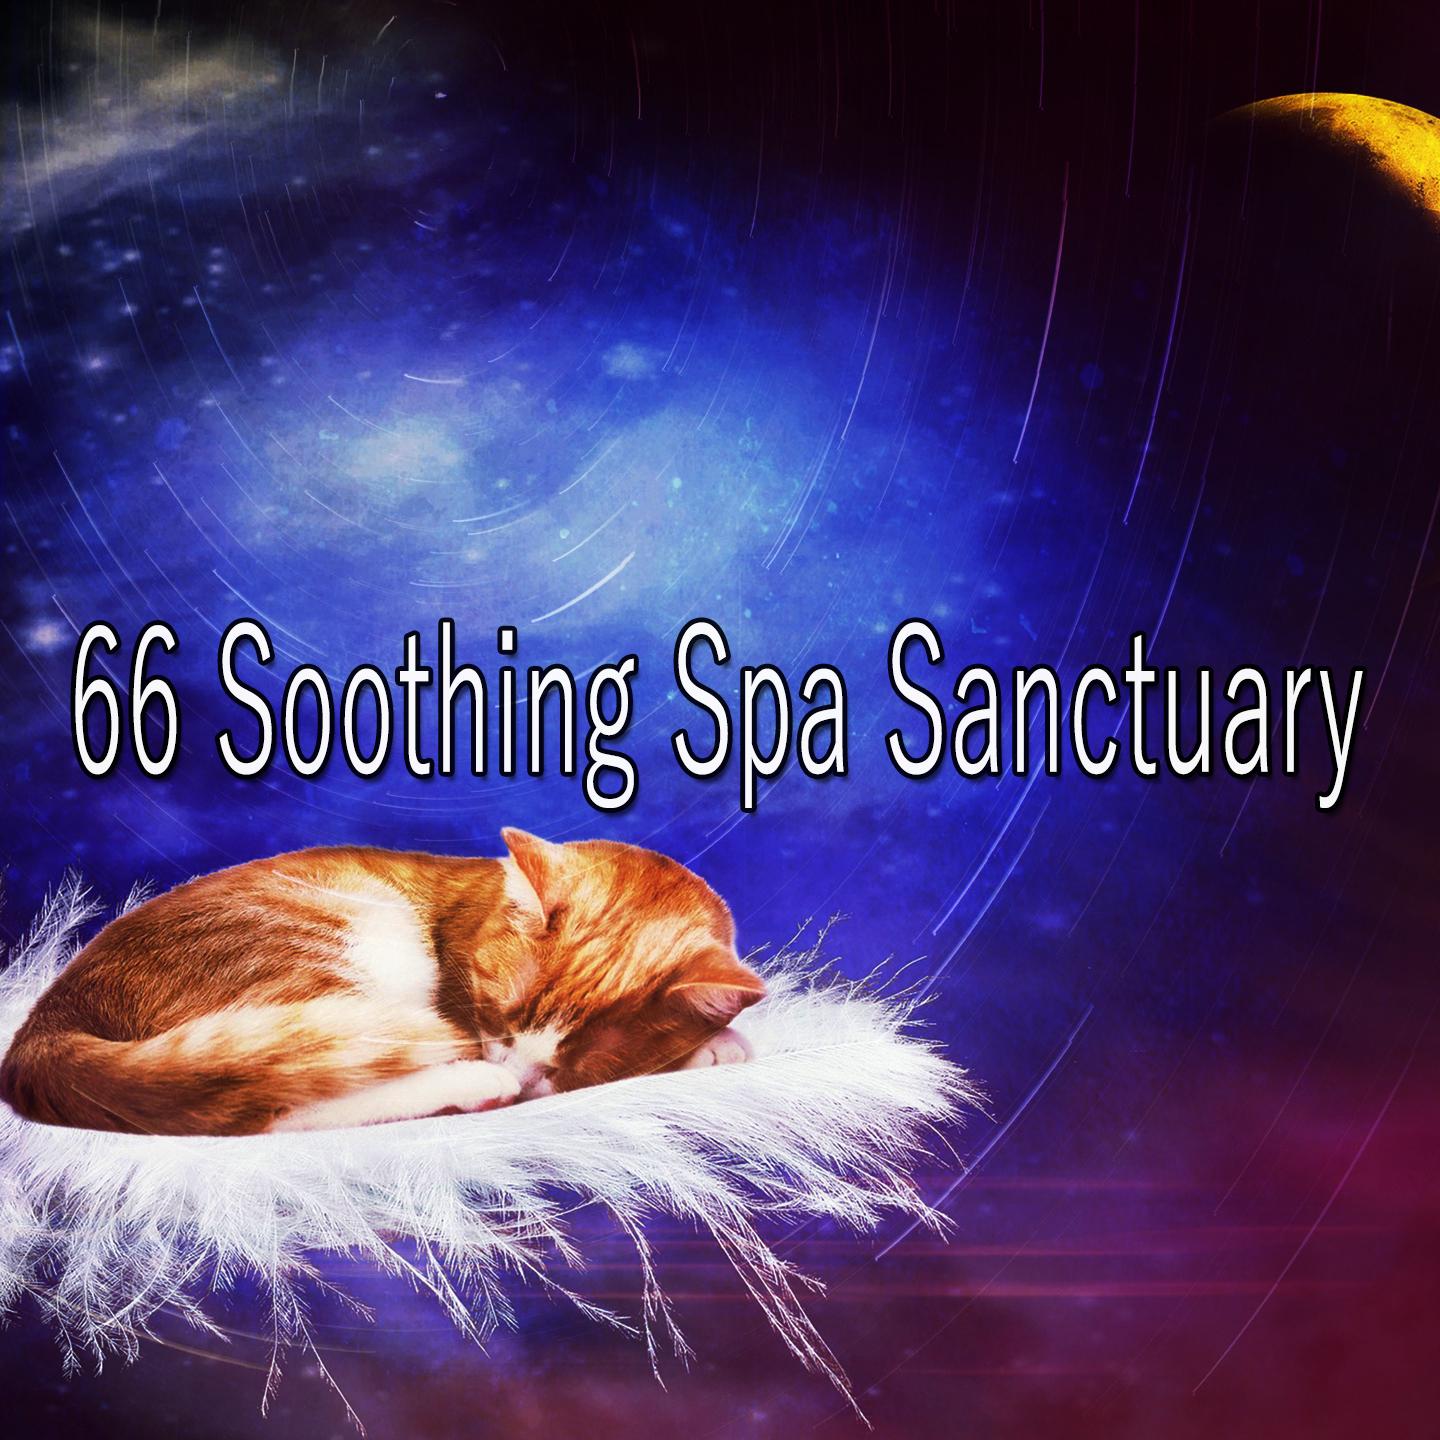 66 Soothing Spa Sanctuary